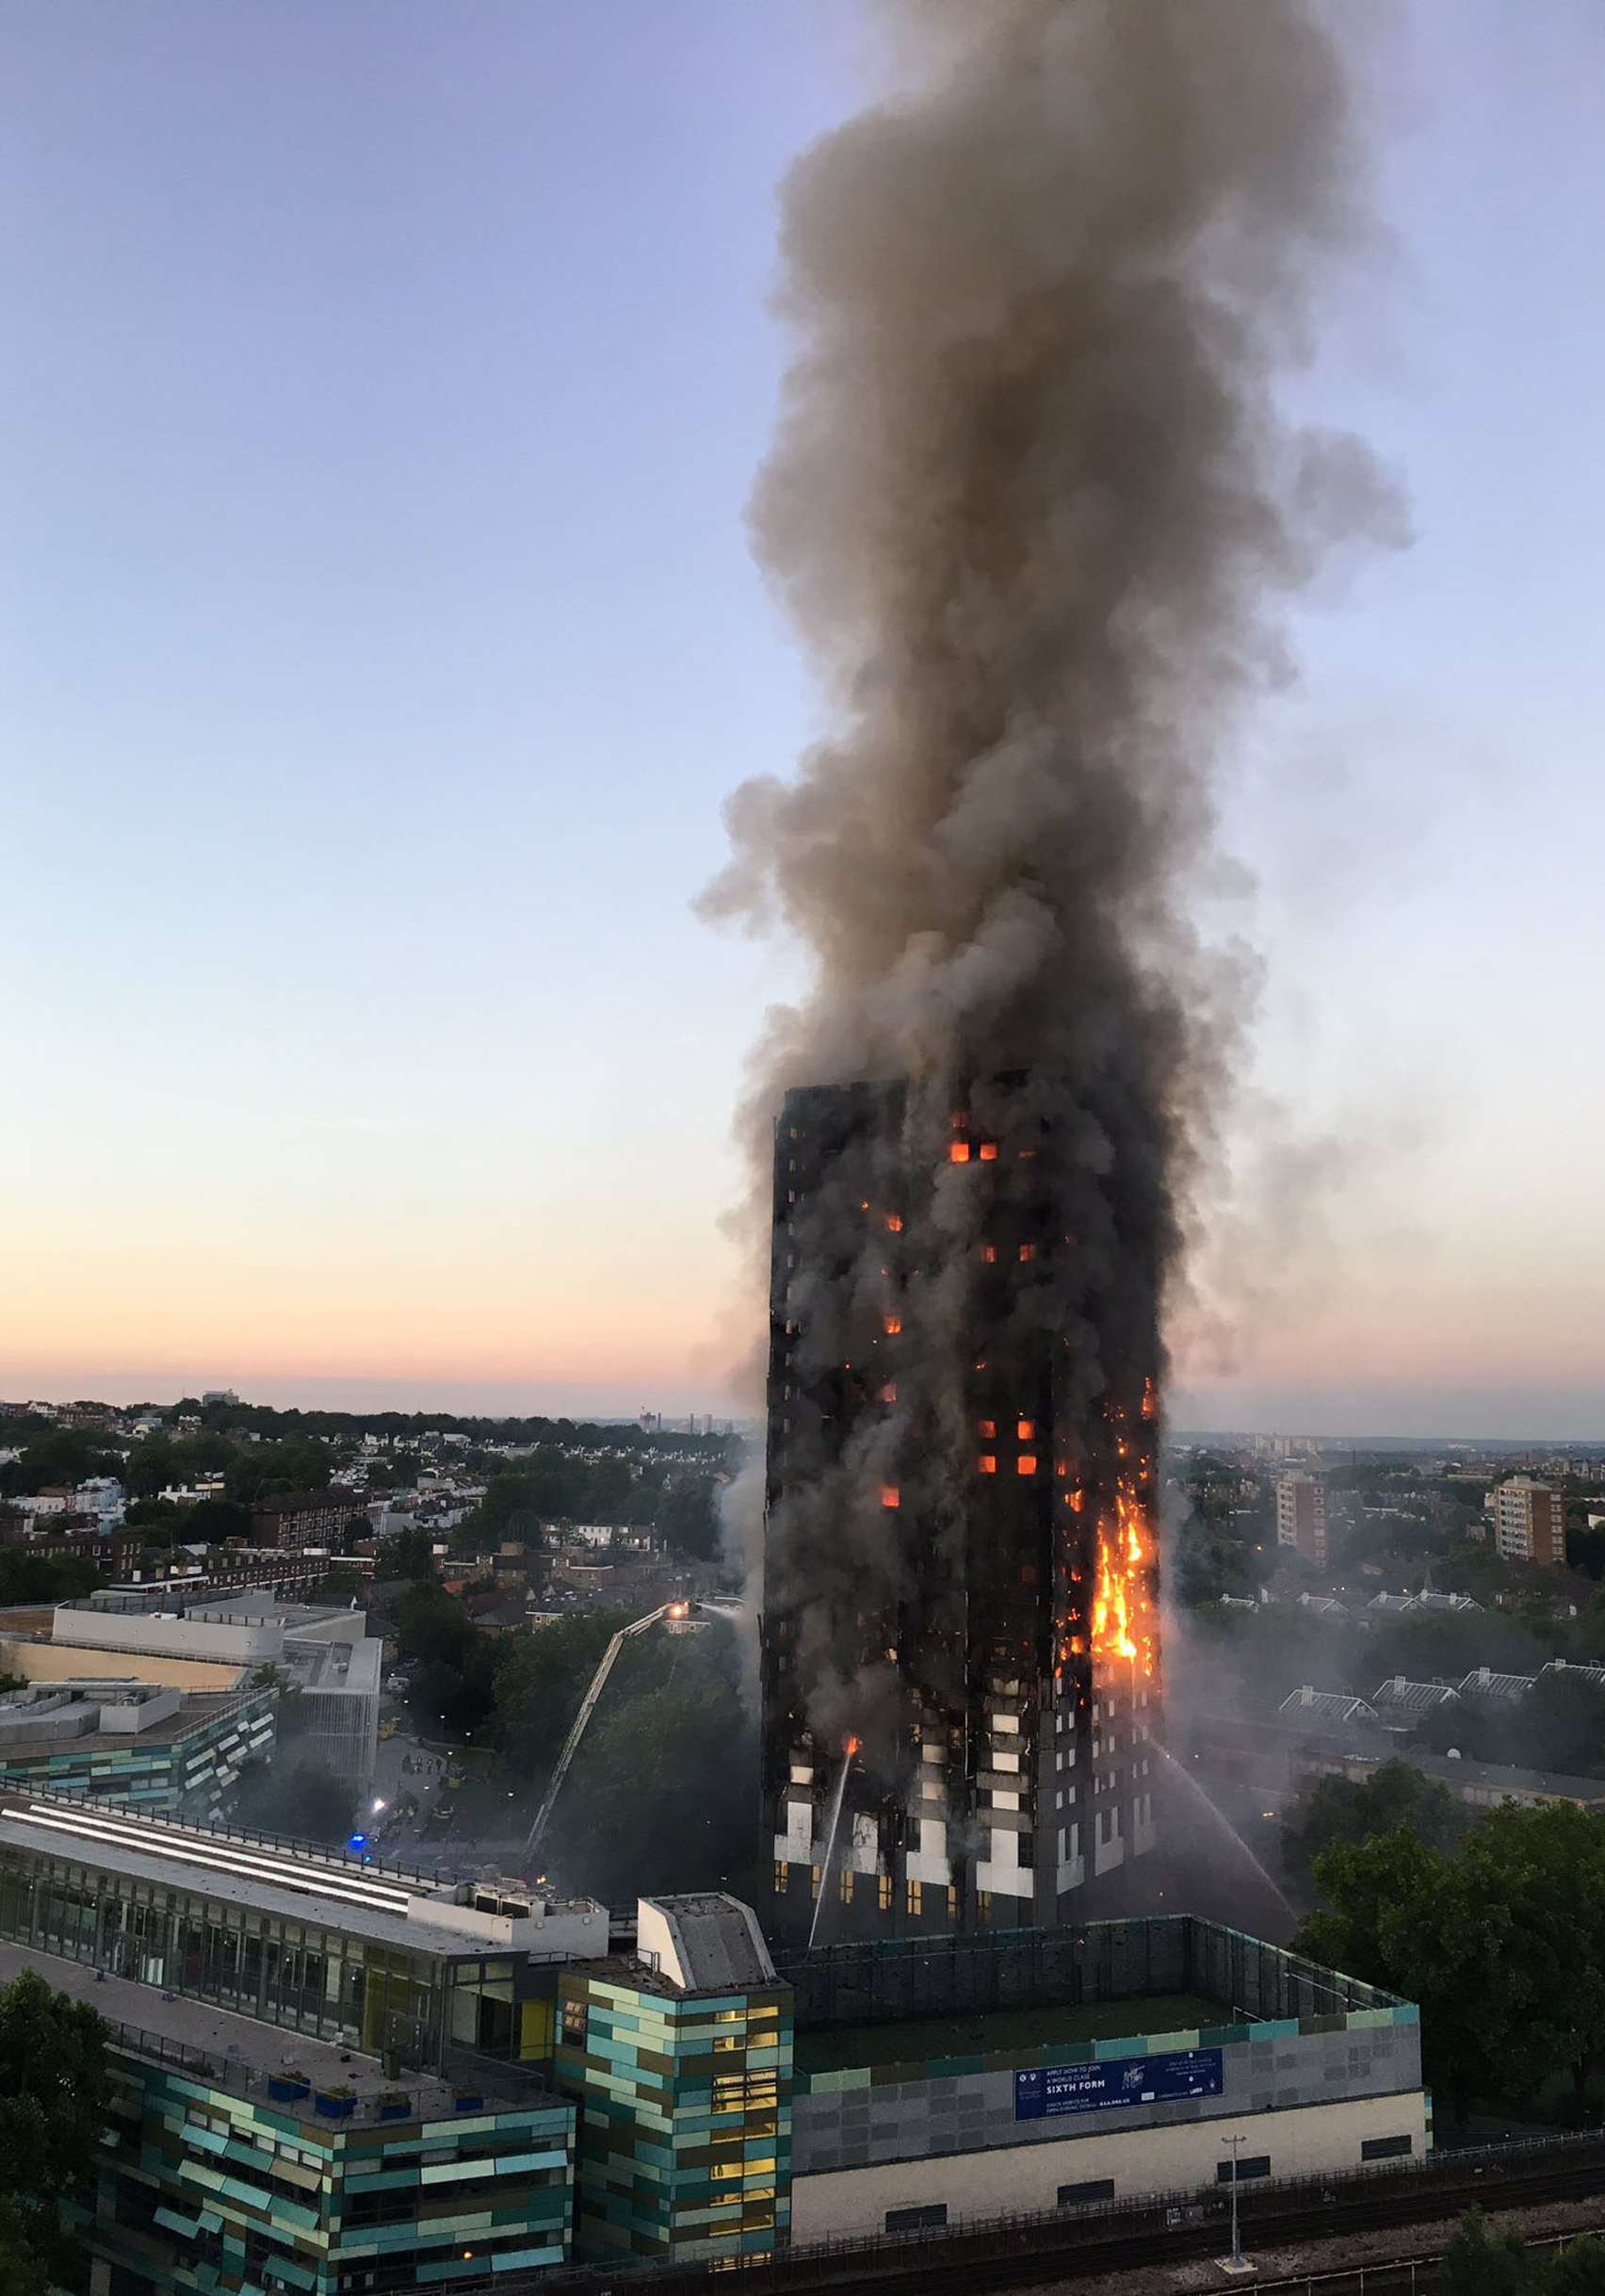 Grenfell Tower fire deaths raise questions about safety of post-war renovations